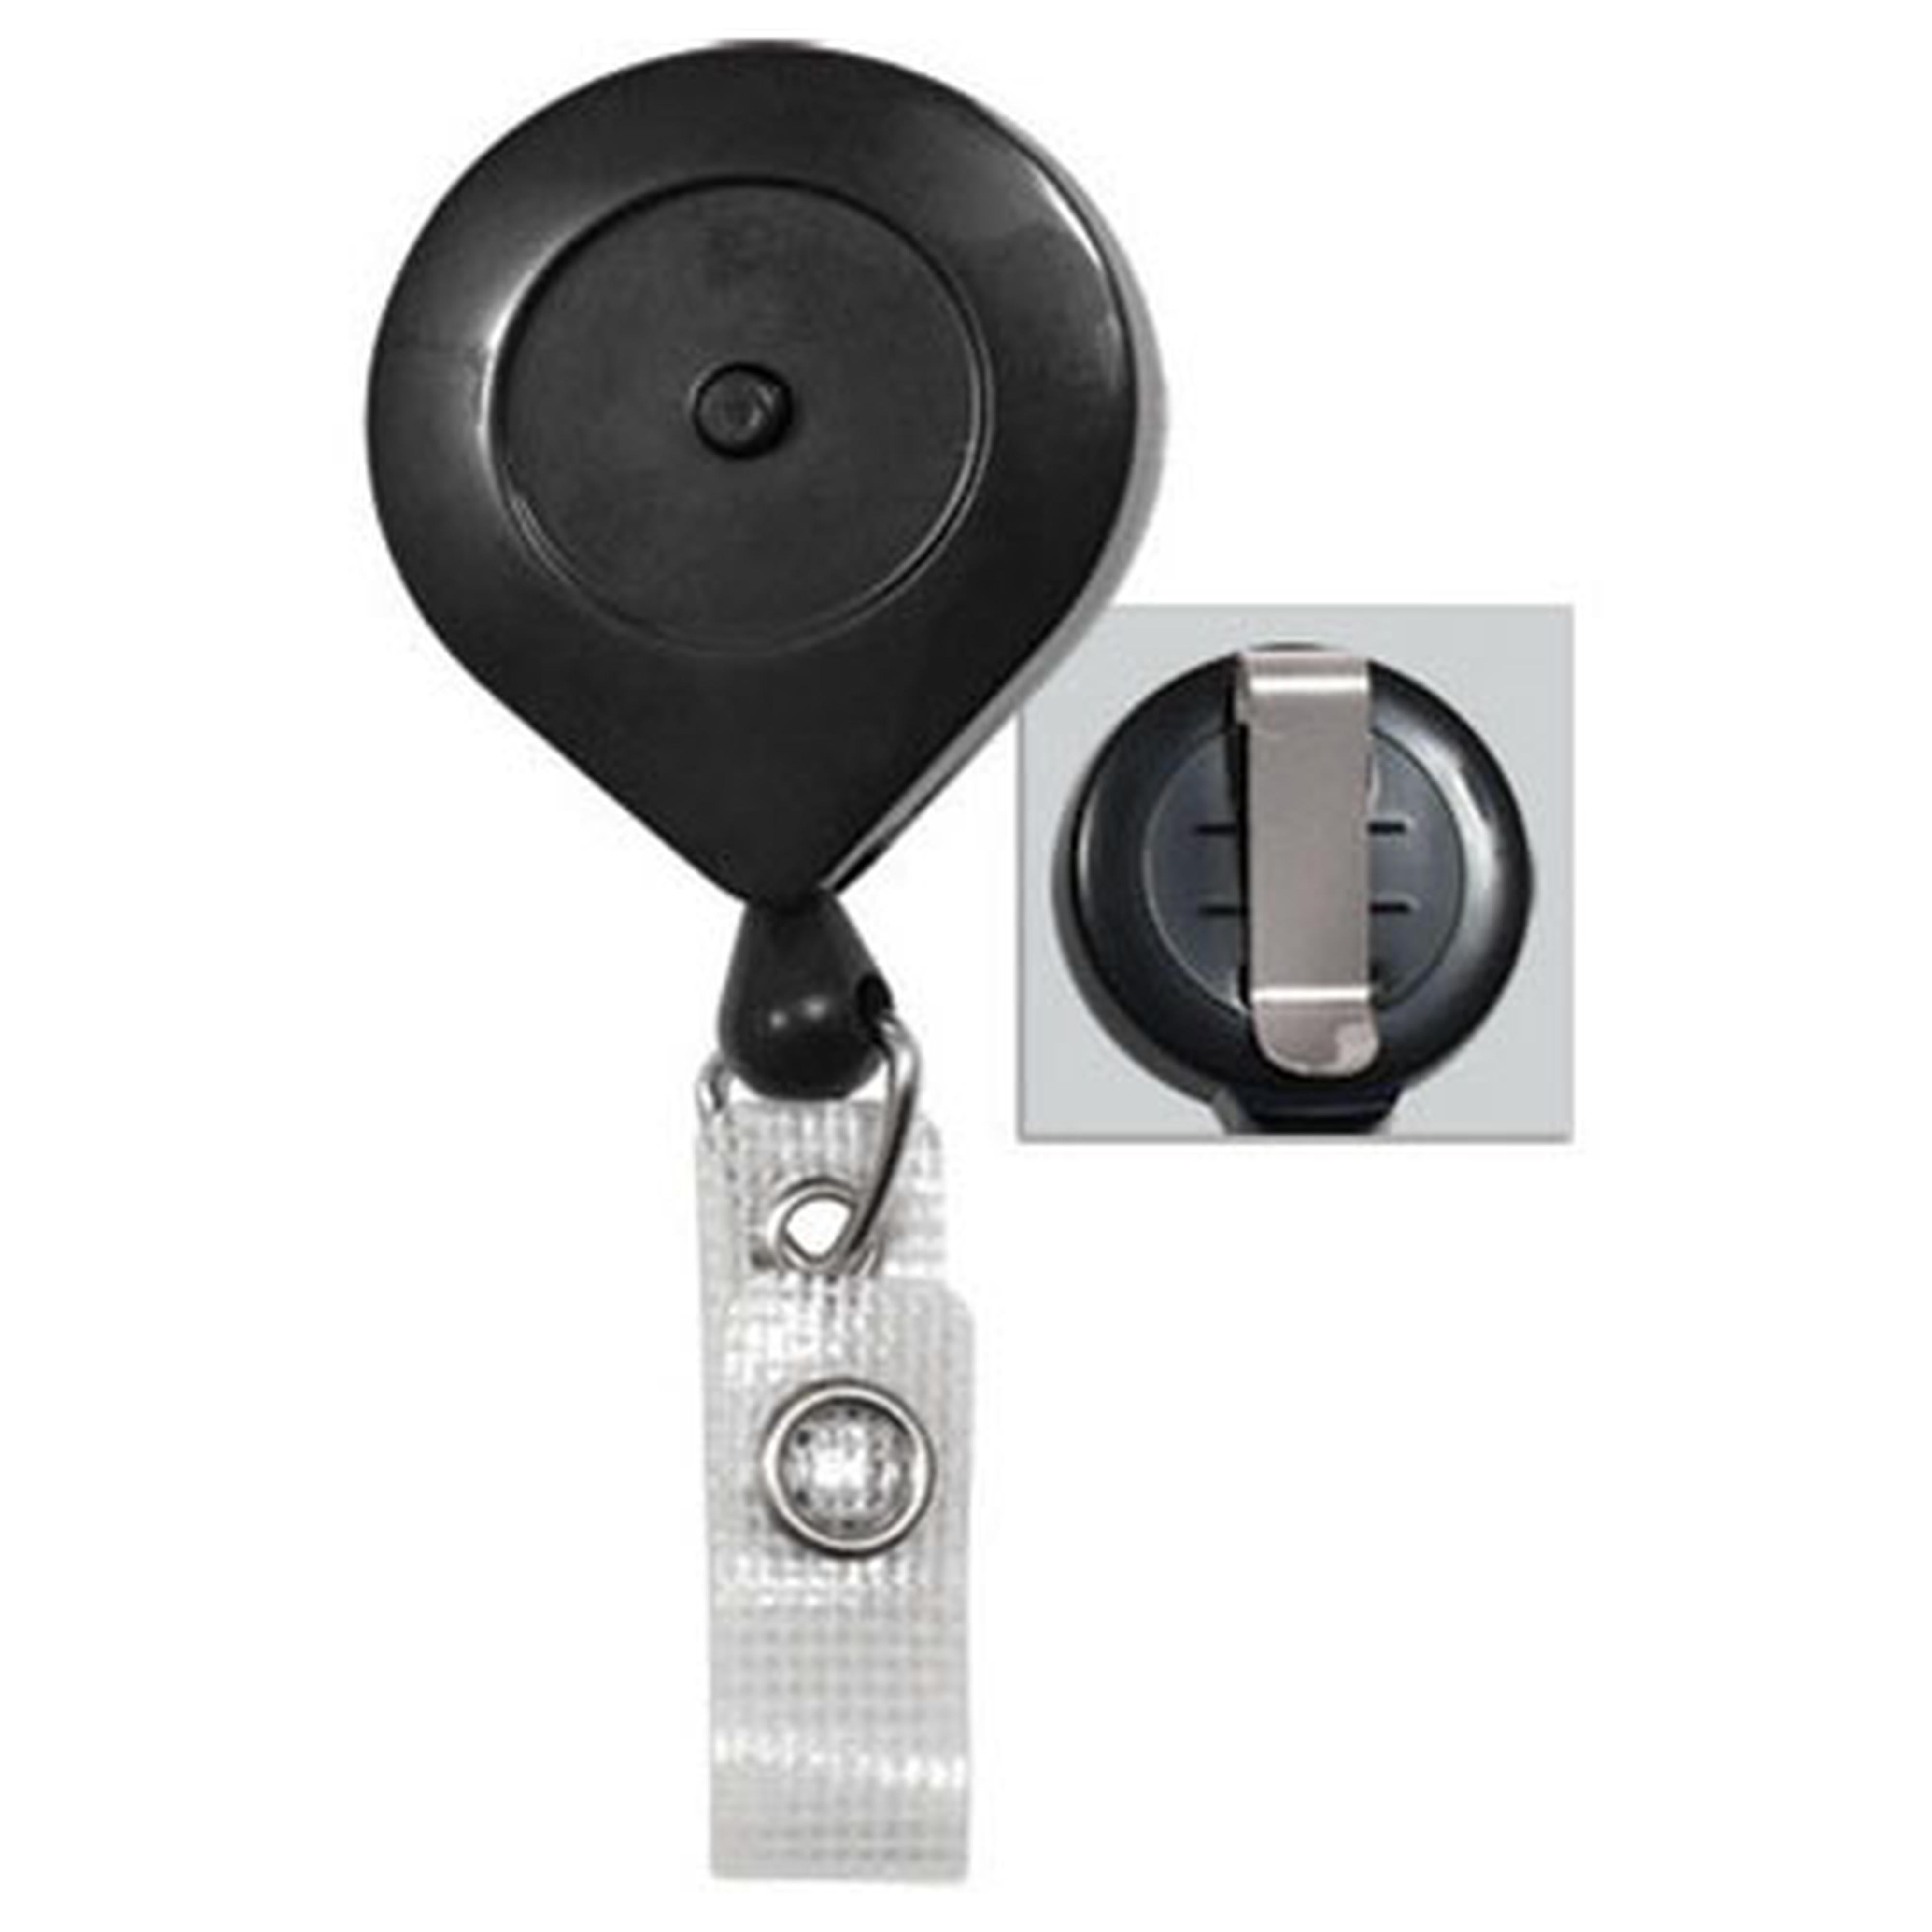 Black Badge Reel with Quick Lock And Release Button - IDenticard Canada